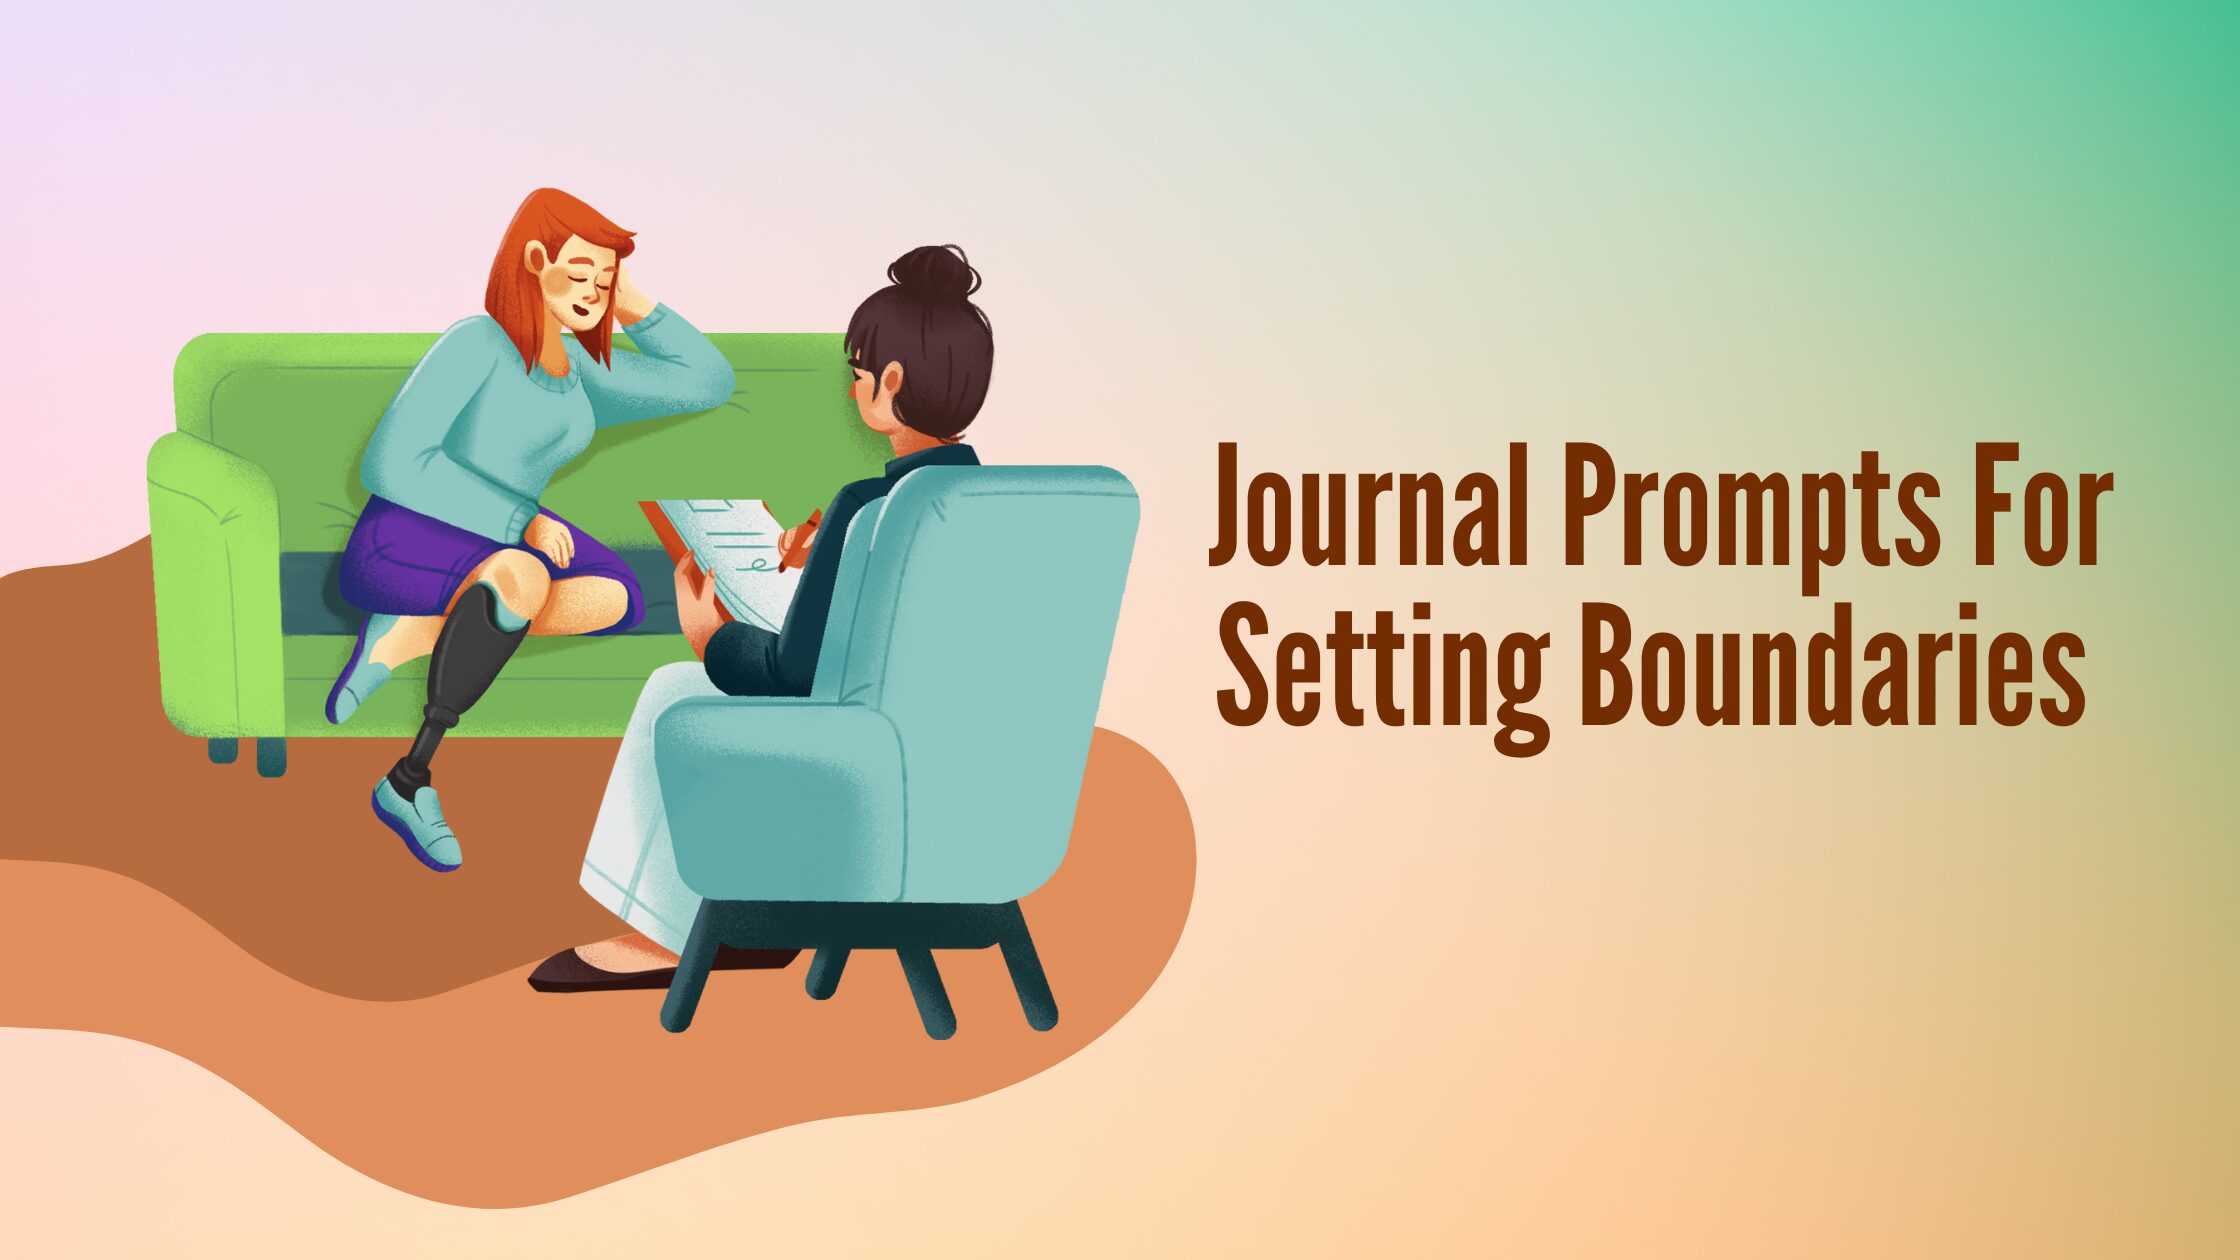 25 Therapy Prompts About Boundaries